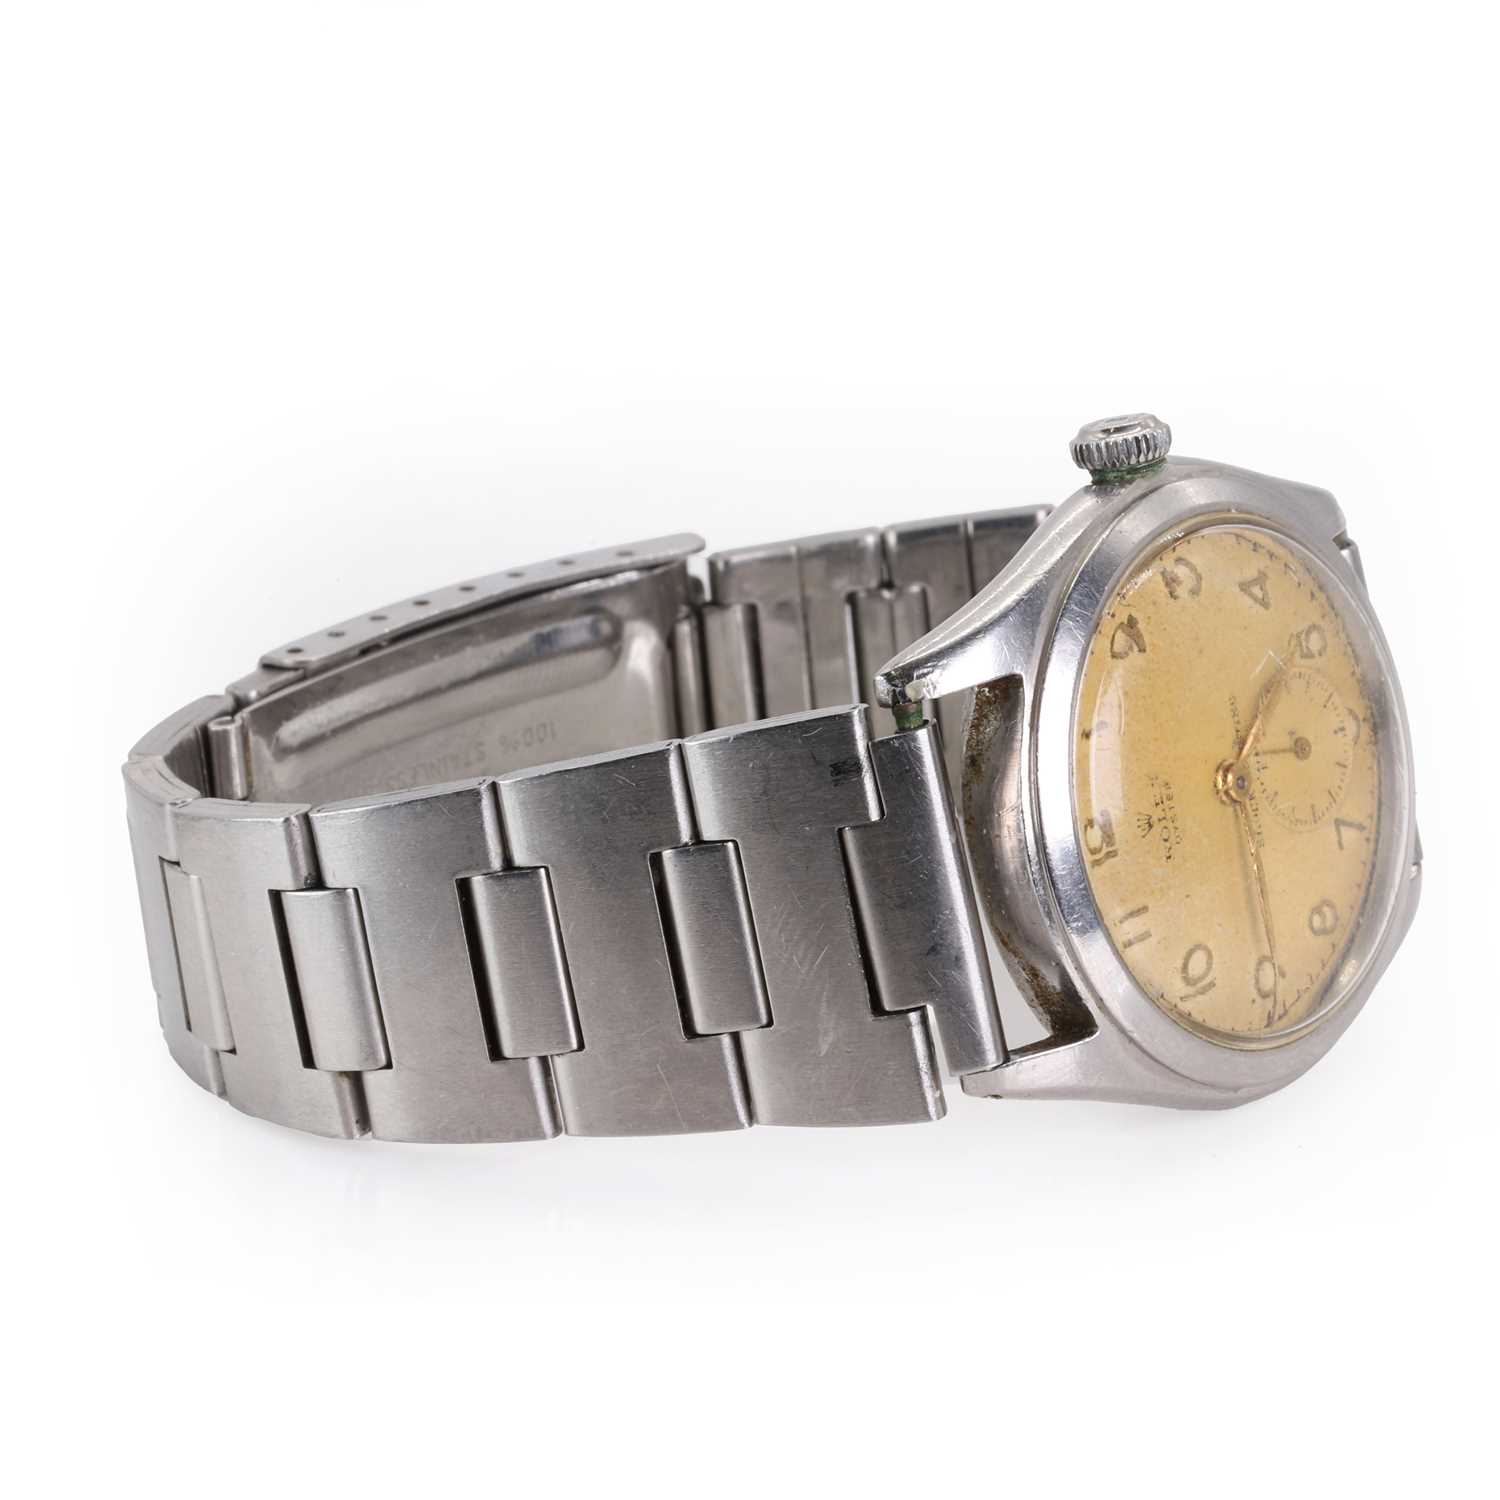 A gentlemen's stainless steel Rolex oyster mechanical watch, c.1946, - Image 2 of 7